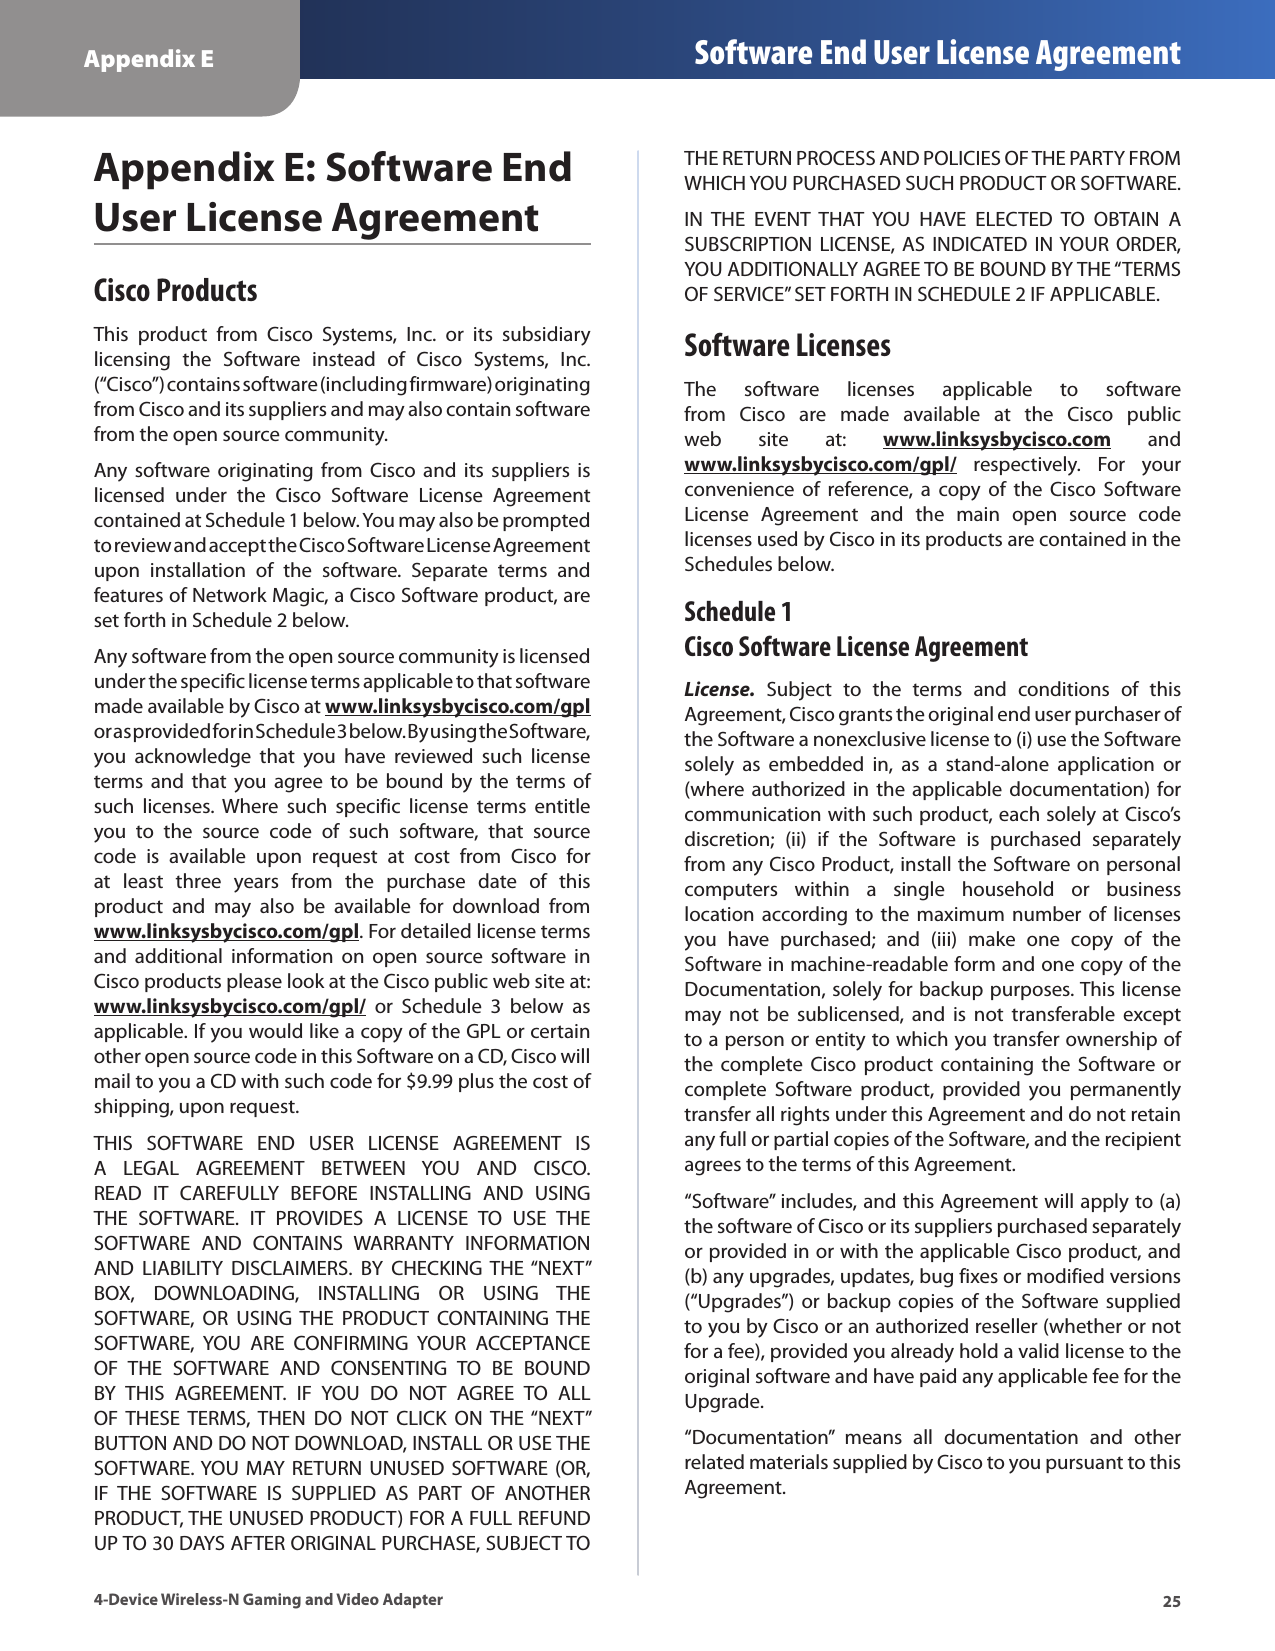 25Appendix E Software End User License Agreement4-Device Wireless-N Gaming and Video AdapterAppendix E: Software End User License AgreementCisco ProductsThis  product  from  Cisco  Systems,  Inc.  or  its  subsidiary licensing  the  Software  instead  of  Cisco  Systems,  Inc. (“Cisco”) contains software (including firmware) originating from Cisco and its suppliers and may also contain software from the open source community. Any software  originating  from Cisco  and  its  suppliers  is licensed  under  the  Cisco  Software  License  Agreement contained at Schedule 1 below. You may also be prompted to review and accept the Cisco Software License Agreement upon  installation  of  the  software.  Separate  terms  and features of Network Magic, a Cisco Software product, are set forth in Schedule 2 below. Any software from the open source community is licensed under the specific license terms applicable to that software made available by Cisco at www.linksysbycisco.com/gpl or as provided for in Schedule 3 below. By using the Software, you  acknowledge  that  you  have  reviewed  such  license terms  and  that  you agree to  be bound  by the  terms  of such  licenses.  Where  such  specific  license  terms  entitle you  to  the  source  code  of  such  software,  that  source code  is  available  upon  request  at  cost  from  Cisco  for at  least  three  years  from  the  purchase  date  of  this product  and  may  also  be  available  for  download  from www.linksysbycisco.com/gpl. For detailed license terms and  additional  information  on  open  source  software  in Cisco products please look at the Cisco public web site at: www.linksysbycisco.com/gpl/  or  Schedule  3  below  as applicable. If you would like a copy of the GPL or certain other open source code in this Software on a CD, Cisco will mail to you a CD with such code for $9.99 plus the cost of shipping, upon request.THIS  SOFTWARE  END  USER  LICENSE  AGREEMENT  IS A  LEGAL  AGREEMENT  BETWEEN  YOU  AND  CISCO. READ  IT  CAREFULLY  BEFORE  INSTALLING  AND  USING THE  SOFTWARE.  IT  PROVIDES  A  LICENSE  TO  USE  THE SOFTWARE  AND  CONTAINS  WARRANTY  INFORMATION AND  LIABILITY  DISCLAIMERS.  BY  CHECKING  THE “NEXT” BOX,  DOWNLOADING,  INSTALLING  OR  USING  THE SOFTWARE,  OR  USING THE  PRODUCT  CONTAINING  THE SOFTWARE,  YOU  ARE  CONFIRMING  YOUR  ACCEPTANCE OF  THE  SOFTWARE  AND  CONSENTING  TO  BE  BOUND BY  THIS  AGREEMENT.  IF  YOU  DO  NOT  AGREE  TO  ALL OF  THESE  TERMS,  THEN  DO  NOT  CLICK  ON THE “NEXT” BUTTON AND DO NOT DOWNLOAD, INSTALL OR USE THE SOFTWARE. YOU  MAY  RETURN UNUSED  SOFTWARE (OR, IF  THE  SOFTWARE  IS  SUPPLIED  AS  PART  OF  ANOTHER PRODUCT, THE UNUSED PRODUCT) FOR A FULL REFUND UP TO 30 DAYS AFTER ORIGINAL PURCHASE, SUBJECT TO THE RETURN PROCESS AND POLICIES OF THE PARTY FROM WHICH YOU PURCHASED SUCH PRODUCT OR SOFTWARE.IN  THE  EVENT  THAT  YOU  HAVE  ELECTED  TO  OBTAIN  A SUBSCRIPTION LICENSE,  AS  INDICATED IN YOUR ORDER, YOU ADDITIONALLY AGREE TO BE BOUND BY THE “TERMS OF SERVICE” SET FORTH IN SCHEDULE 2 IF APPLICABLE.Software LicensesThe  software  licenses  applicable  to  software from  Cisco  are  made  available  at  the  Cisco  public web  site  at:  www.linksysbycisco.com  and www.linksysbycisco.com/gpl/  respectively.  For  your convenience  of  reference,  a  copy  of  the  Cisco  Software License  Agreement  and  the  main  open  source  code licenses used by Cisco in its products are contained in the Schedules below.Schedule 1 Cisco Software License AgreementLicense.  Subject  to  the  terms  and  conditions  of  this Agreement, Cisco grants the original end user purchaser of the Software a nonexclusive license to (i) use the Software solely  as  embedded  in,  as  a  stand-alone  application  or (where authorized in  the  applicable documentation) for communication with such product, each solely at Cisco’s discretion;  (ii)  if  the  Software  is  purchased  separately from any Cisco Product, install the Software on personal computers  within  a  single  household  or  business location according to the  maximum number  of  licenses you  have  purchased;  and  (iii)  make  one  copy  of  the Software in machine-readable form and one copy of the Documentation, solely for backup purposes. This license may  not  be  sublicensed,  and  is  not  transferable  except to a person or entity to which you transfer ownership of the  complete  Cisco  product  containing  the  Software  or complete  Software  product,  provided  you  permanently transfer all rights under this Agreement and do not retain any full or partial copies of the Software, and the recipient agrees to the terms of this Agreement. “Software” includes, and this Agreement will apply to (a) the software of Cisco or its suppliers purchased separately or provided in or with the applicable Cisco product, and (b) any upgrades, updates, bug fixes or modified versions (“Upgrades”)  or  backup copies of the Software supplied to you by Cisco or an authorized reseller (whether or not for a fee), provided you already hold a valid license to the original software and have paid any applicable fee for the Upgrade. “Documentation”  means  all  documentation  and  other related materials supplied by Cisco to you pursuant to this Agreement.